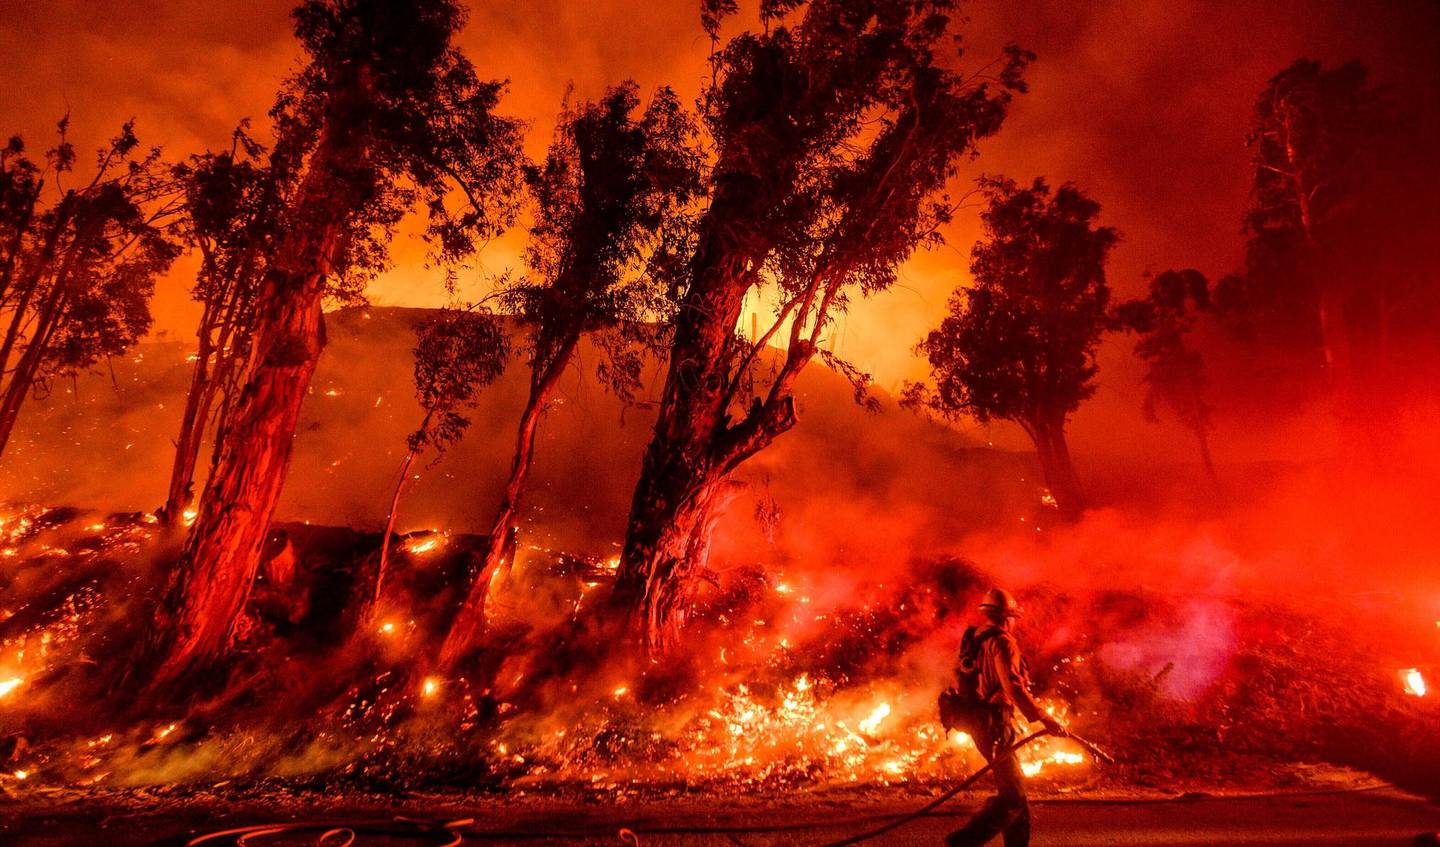 FILE - In this Nov. 1, 2019 file photo flames from a backfire consume a hillside as firefighters battle the Maria Fire in Santa Paula, Calif. According to the Ventura County Fire Department, the blaze has scorched more than 8,000 acres and destroyed at least two structures. (AP Photo/Noah Berger,File)